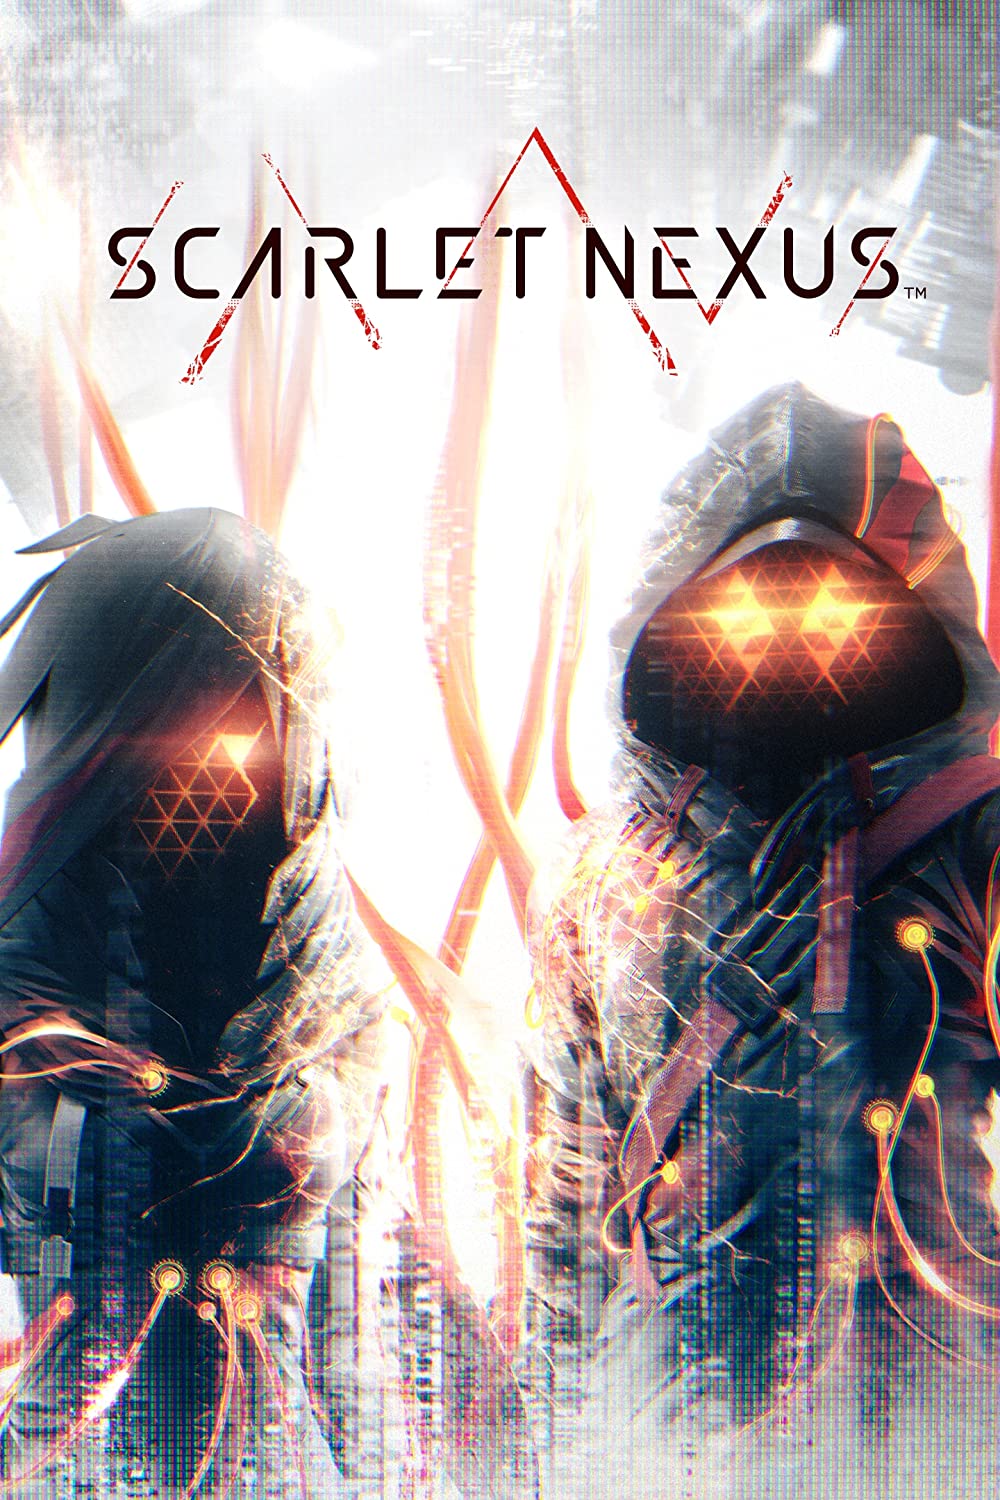 SCARLET NEXUS Vol.2 First Limited Edition Blu-ray Soundtrack CD Booklet  Japan